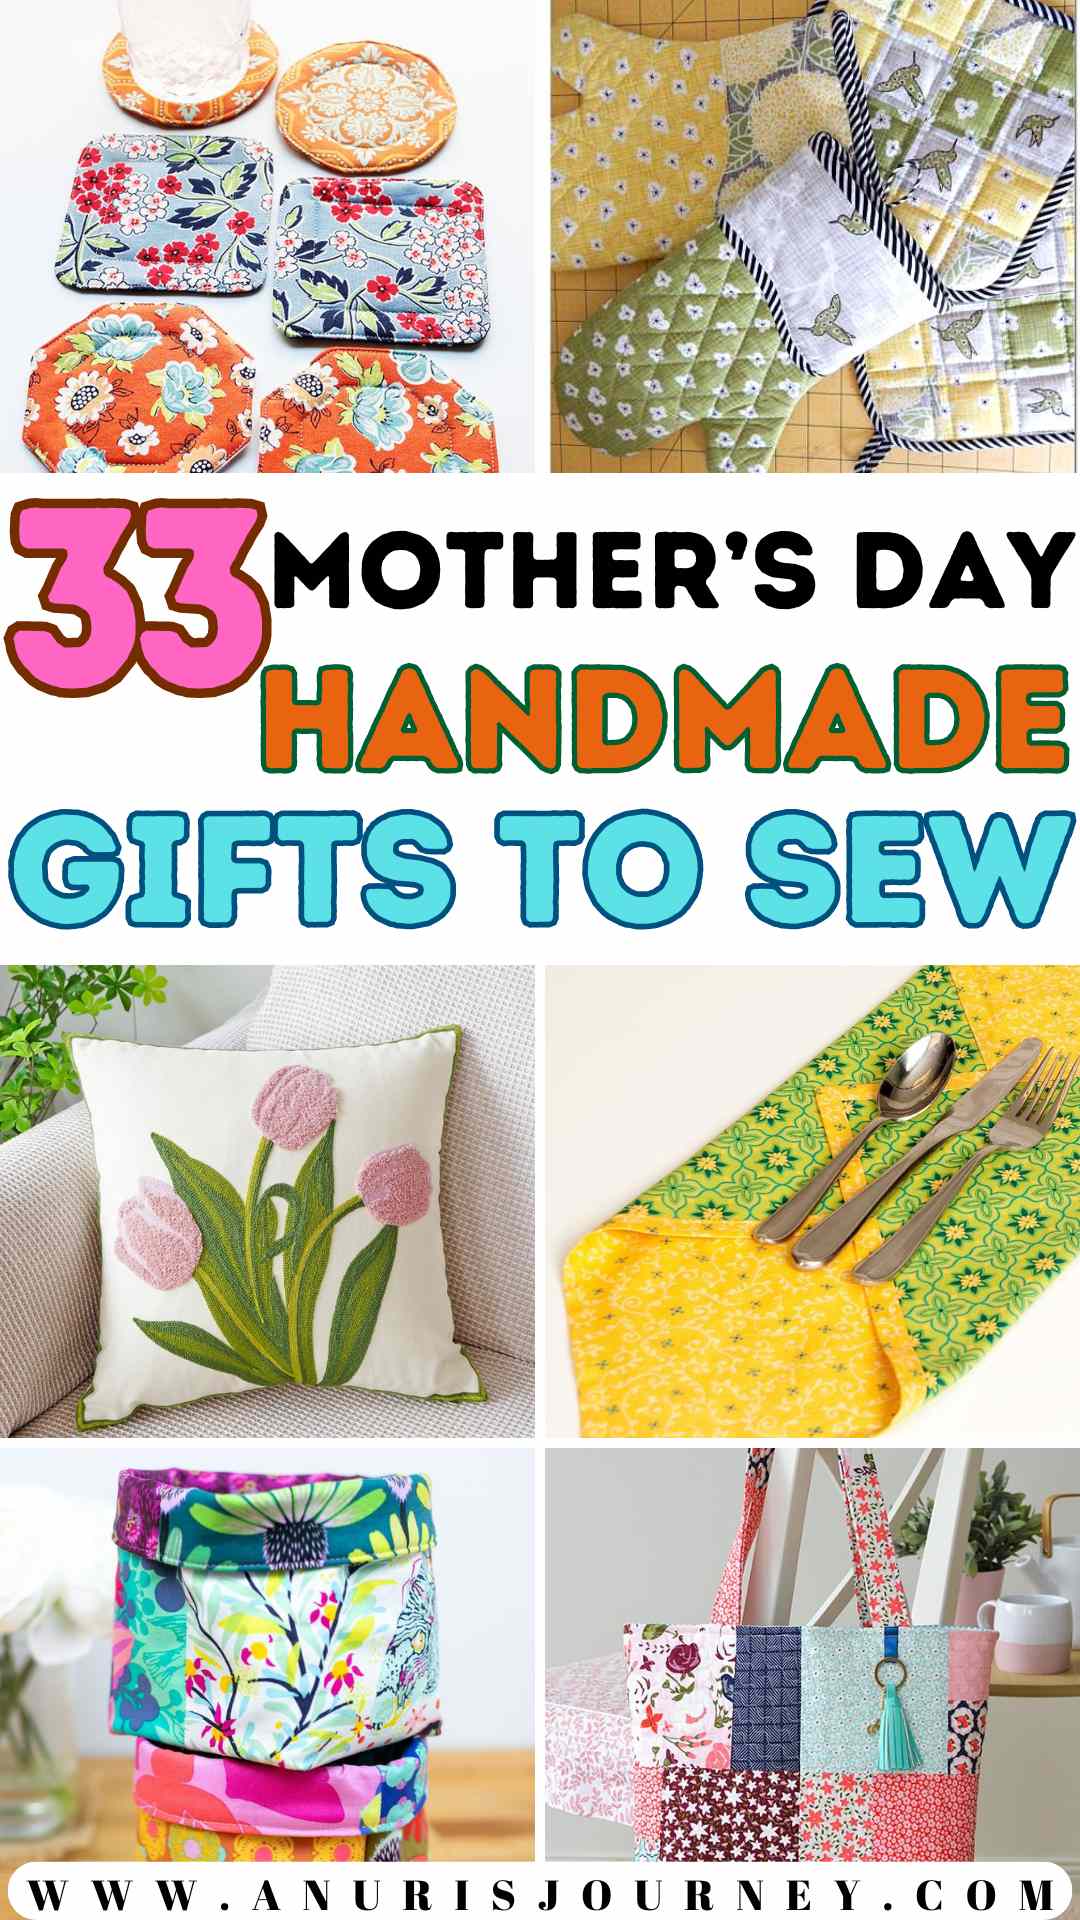 Mothers-day-handmade-gifts-to-sew